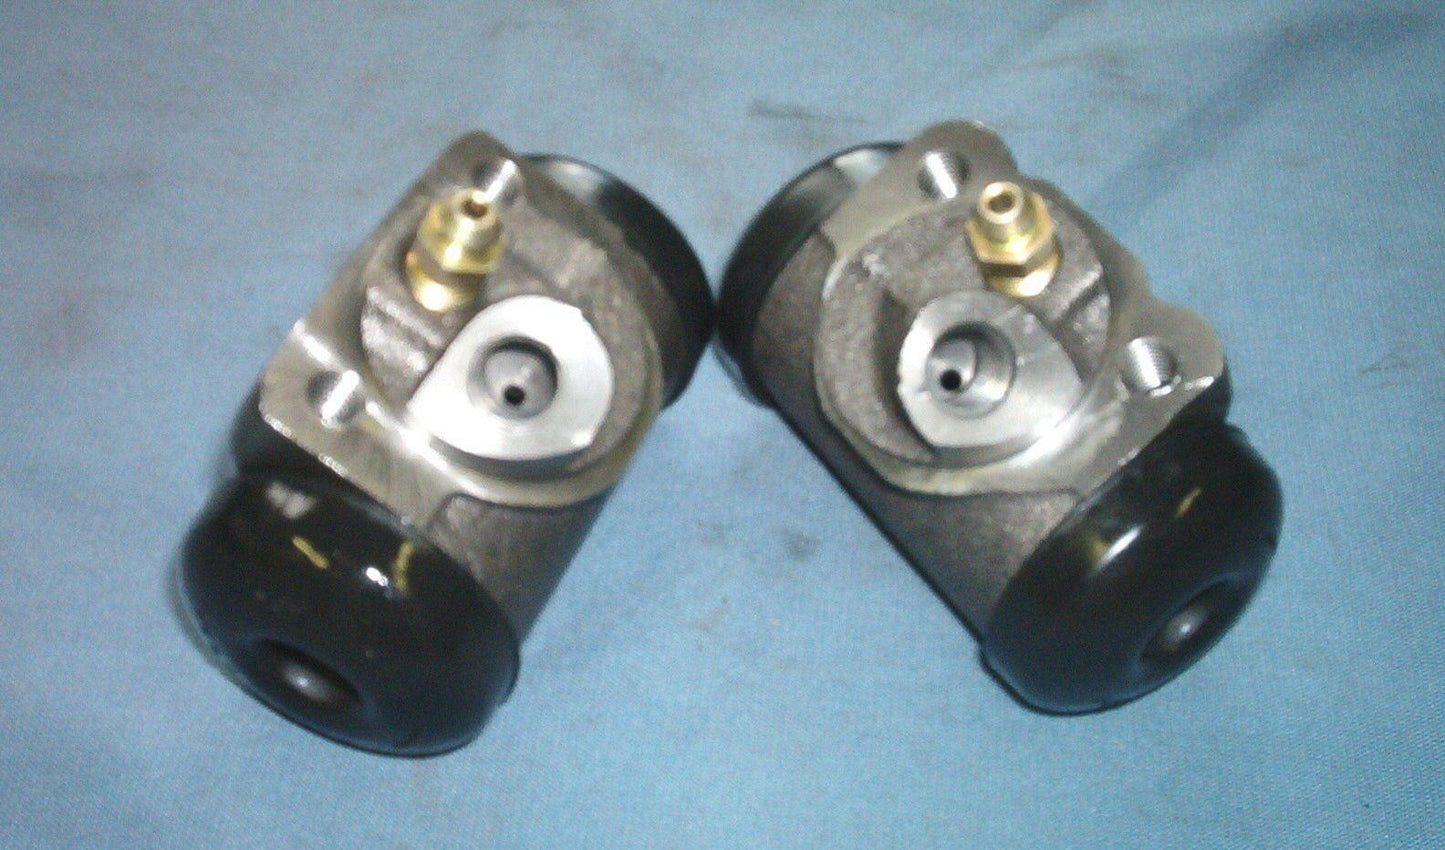 Wheel cyl SET Chevy Full Size Buick & Corvette 2 cylinders 1951-1959 FRONT